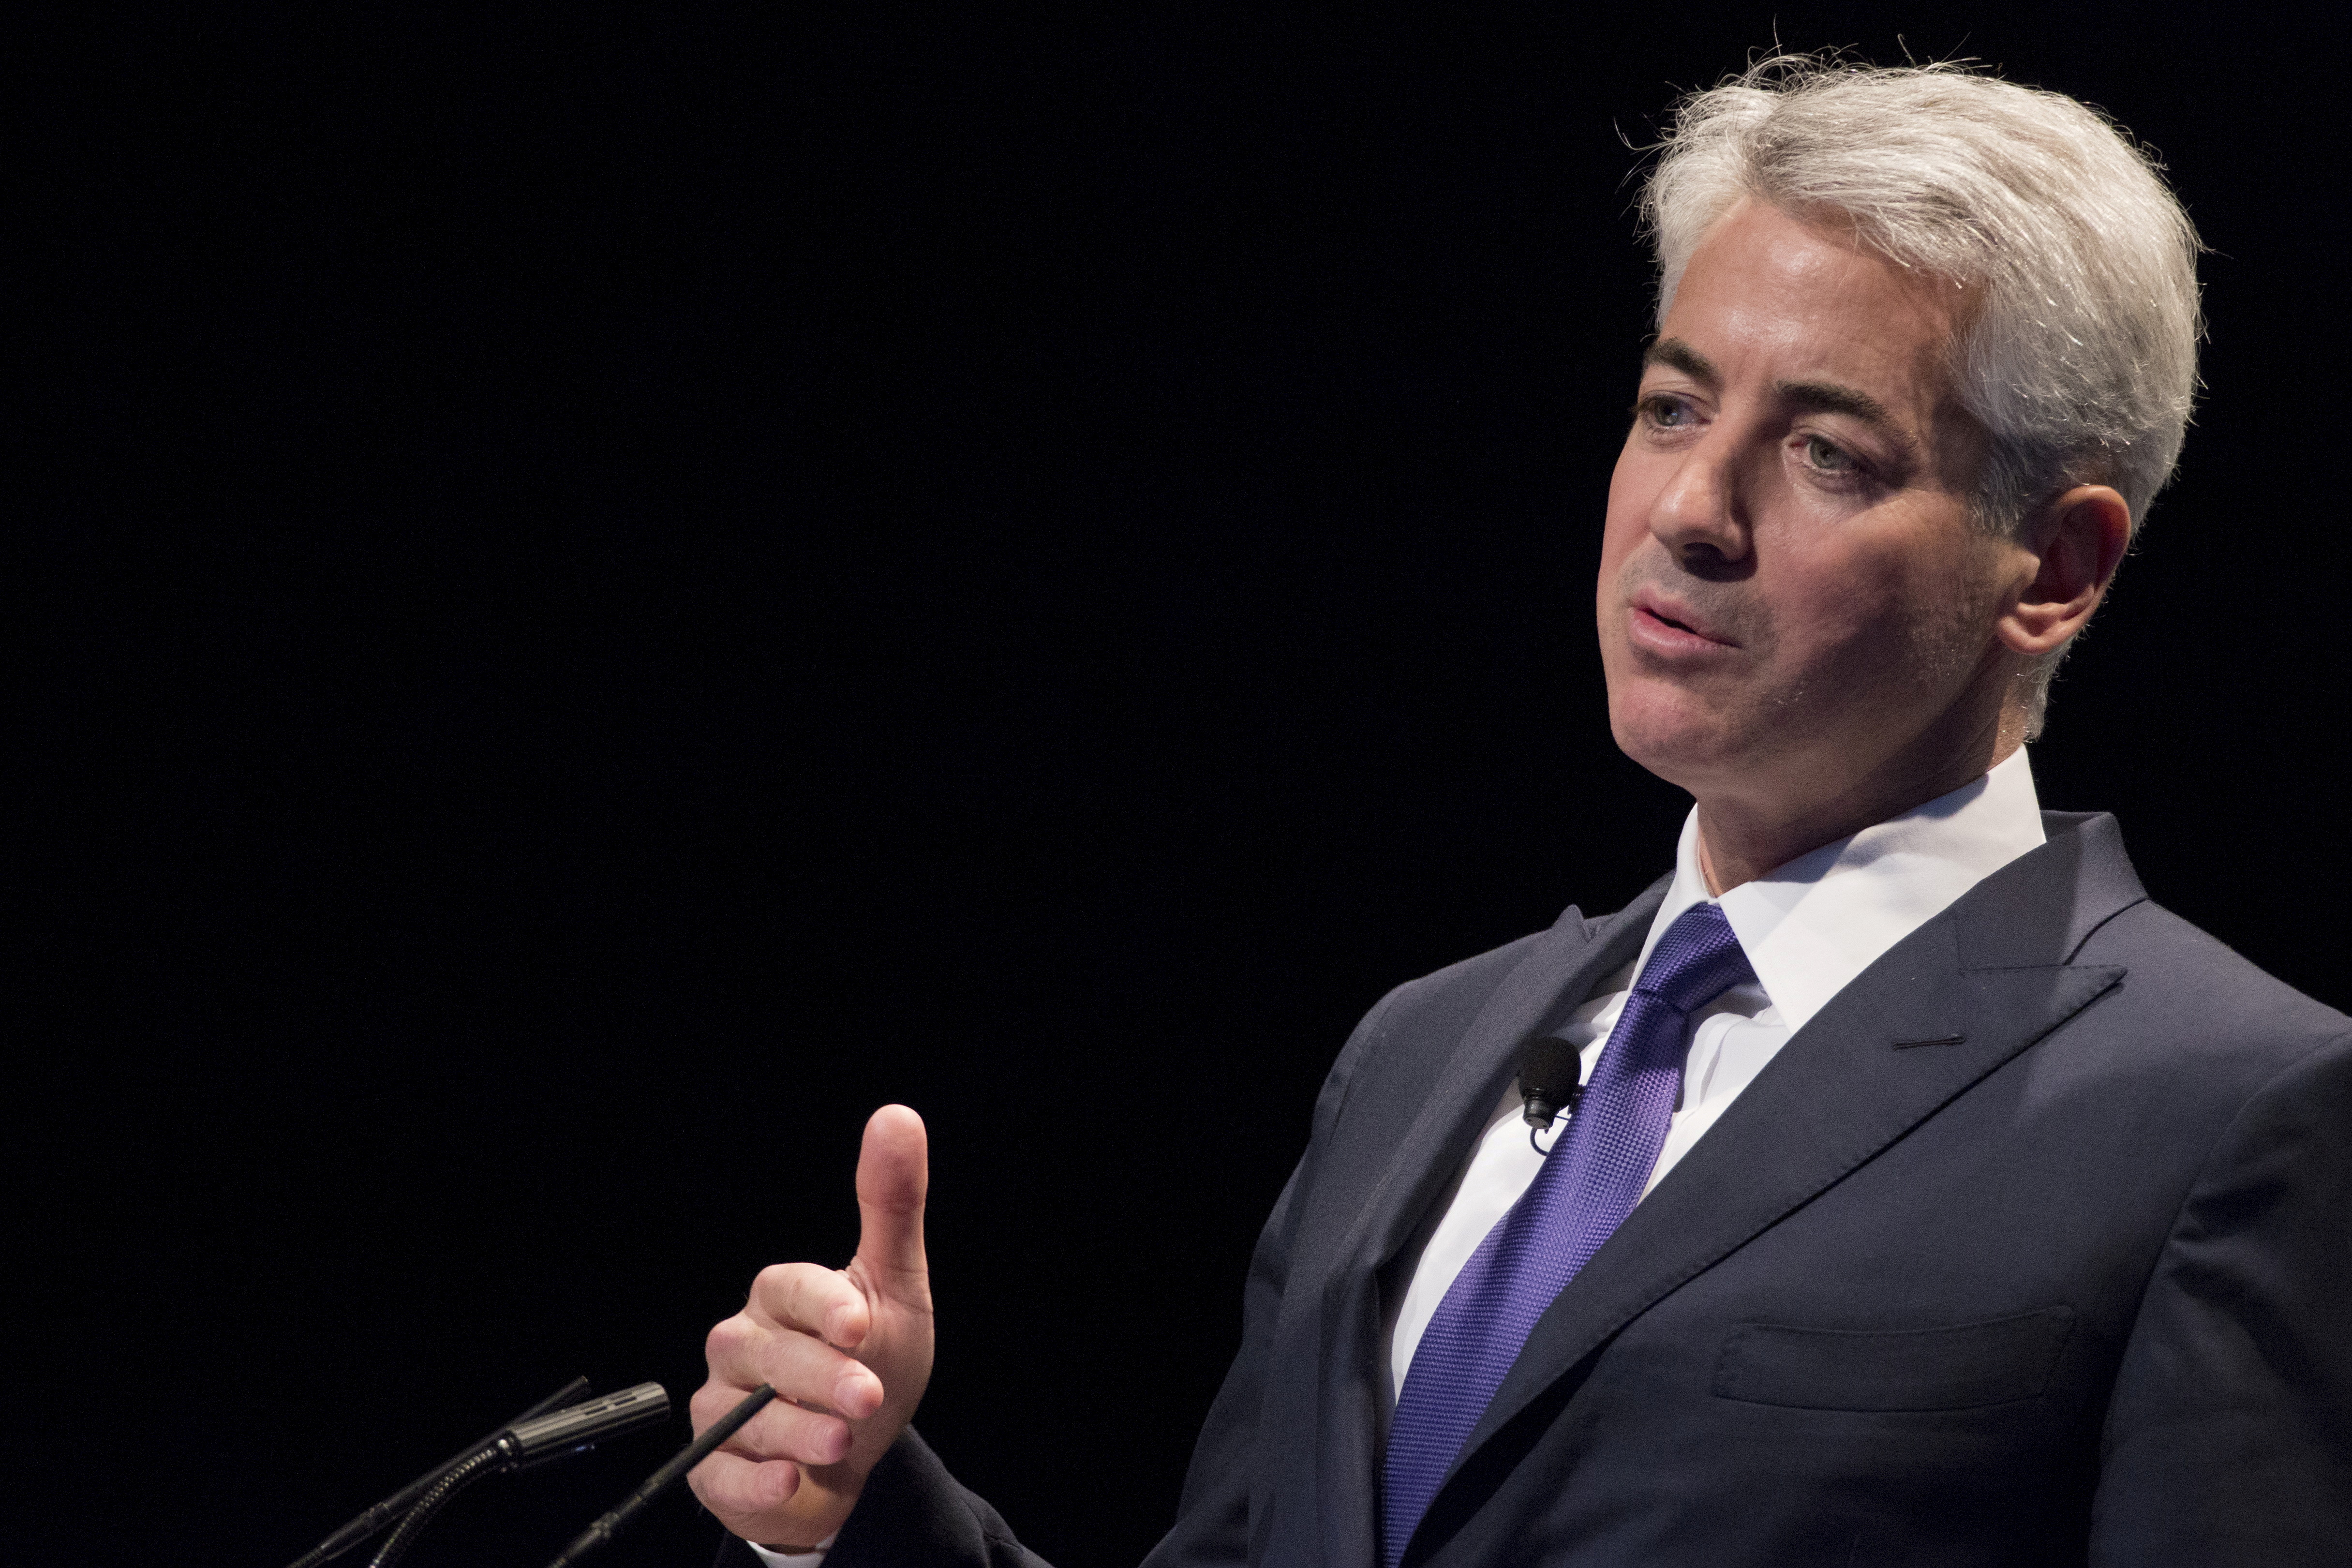 William Ackman, founder and CEO of hedge fund Pershing Square Capital Management